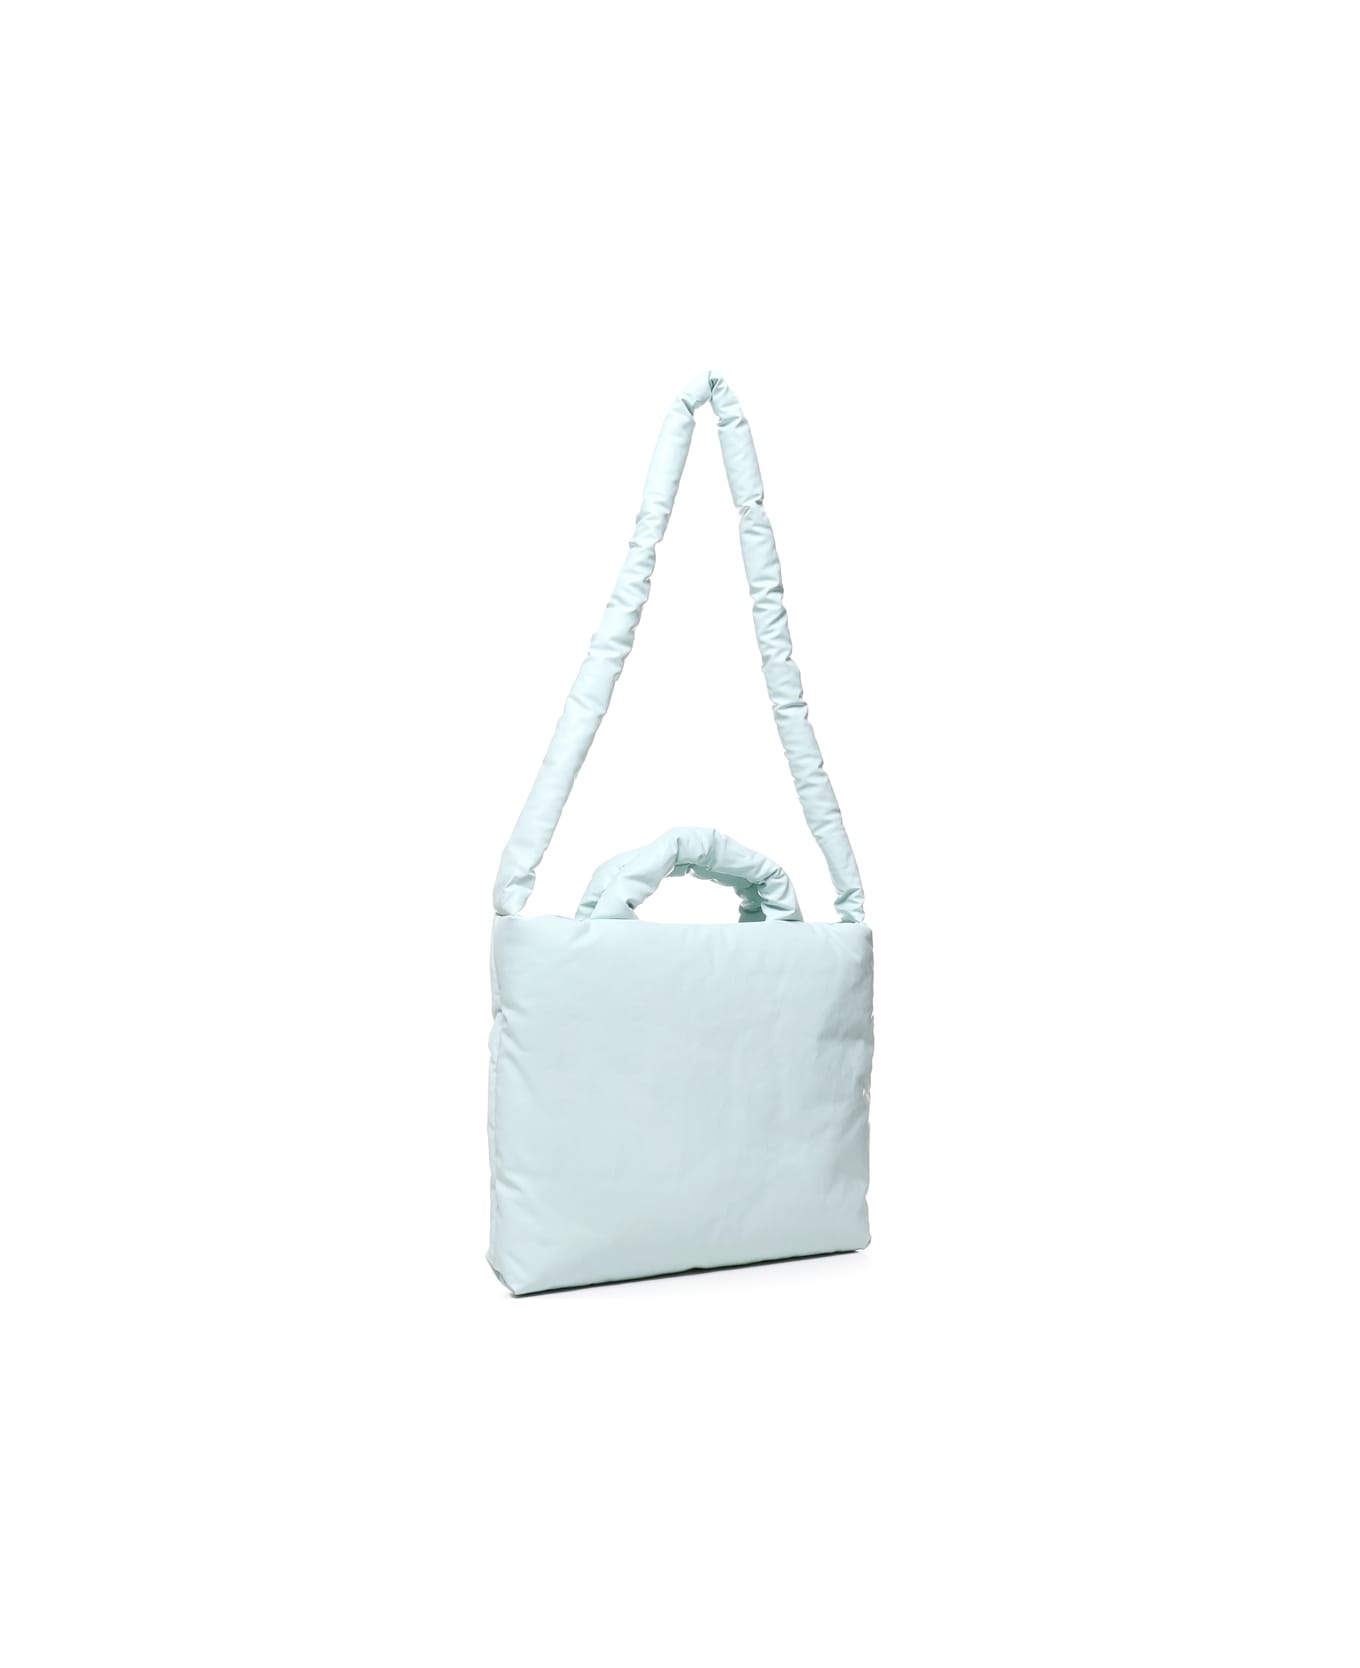 KASSL Editions Small Padded Pillow Bag - Ice トートバッグ